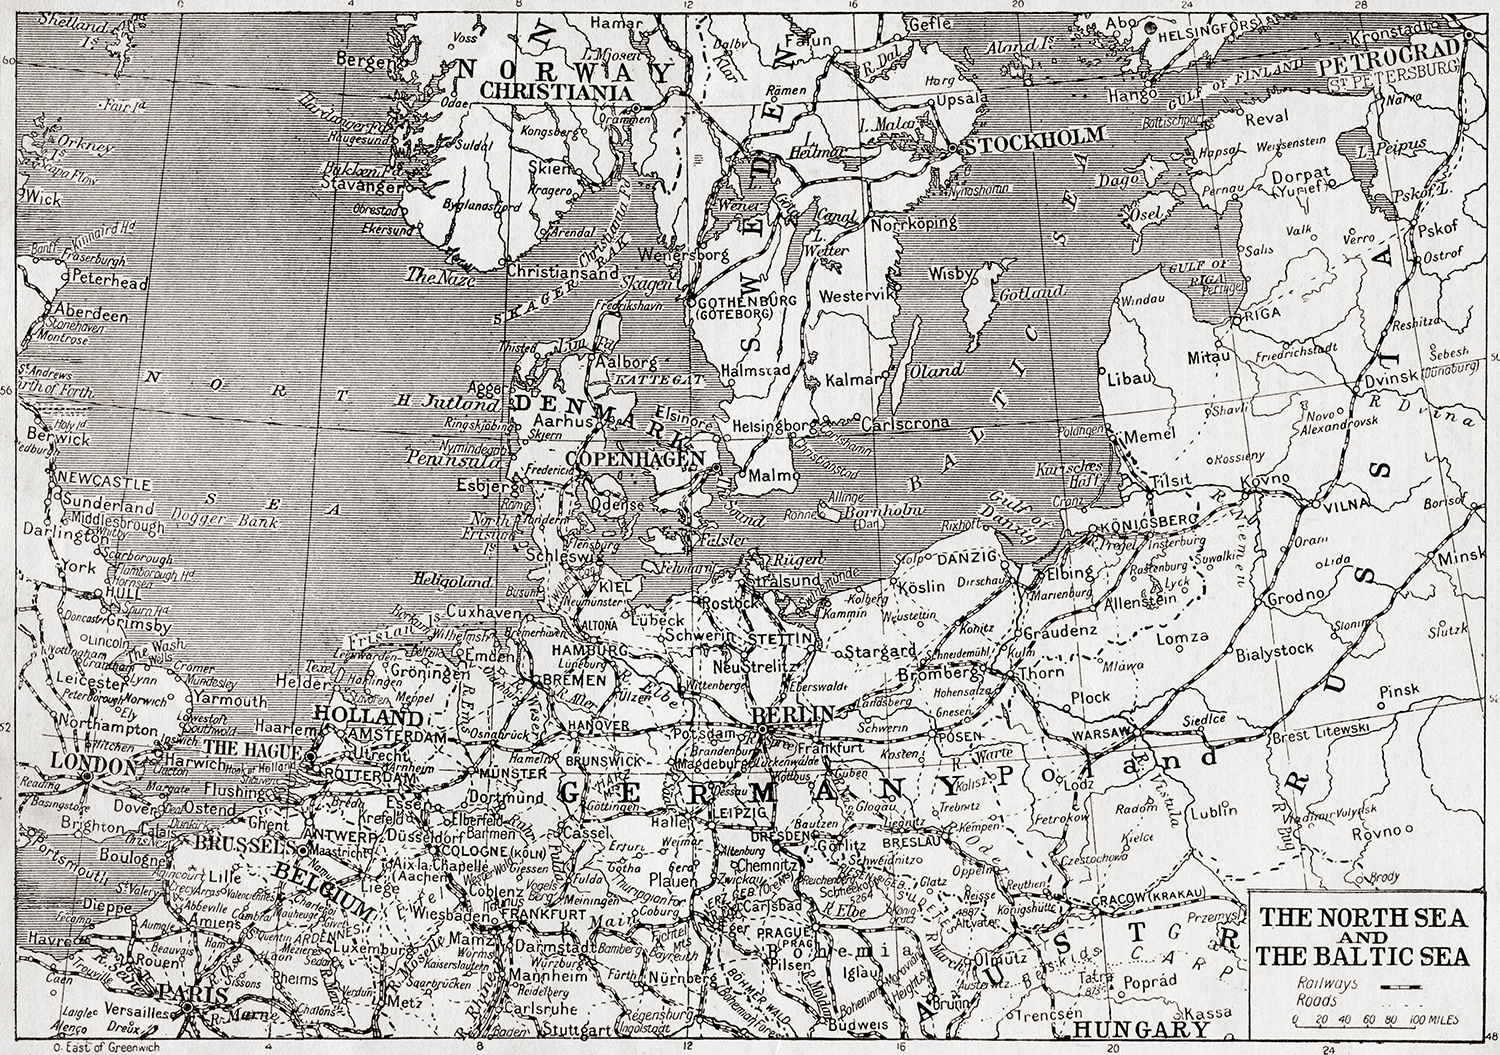 Map of the North Sea and Baltic Sea, 1914.